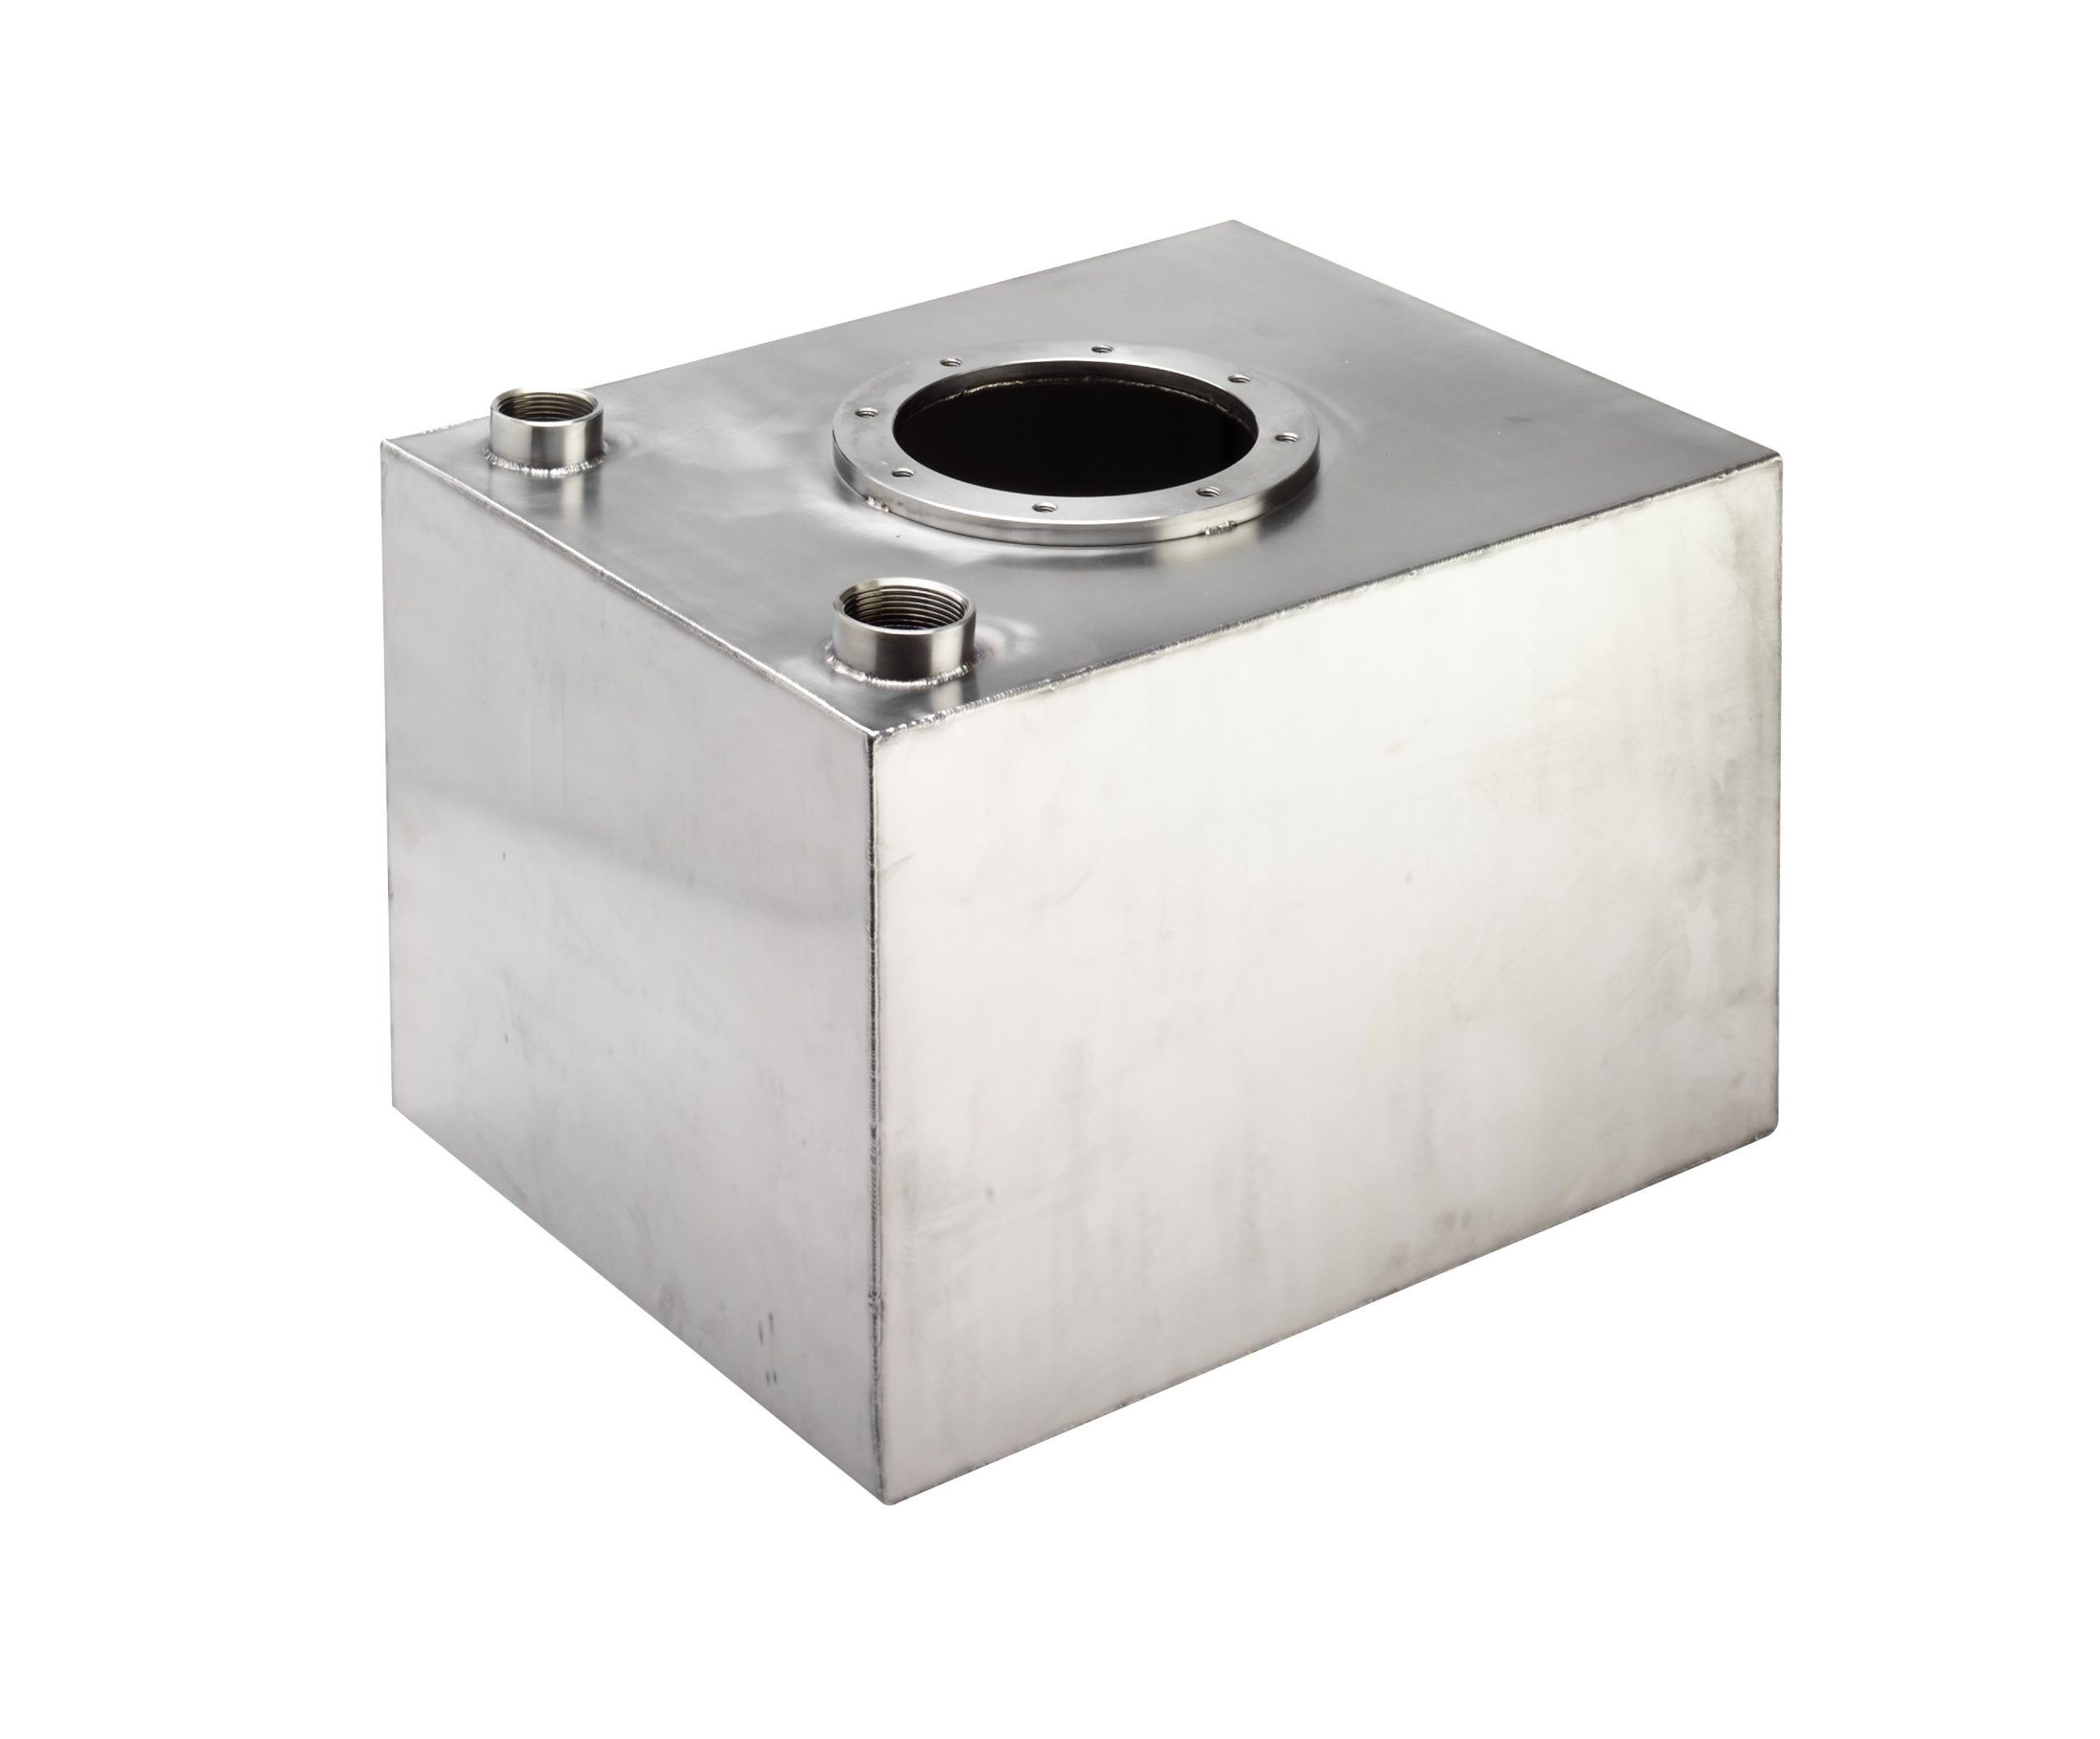 40 Litre Stainless Steel Tank - Drinking Water or Waste Water